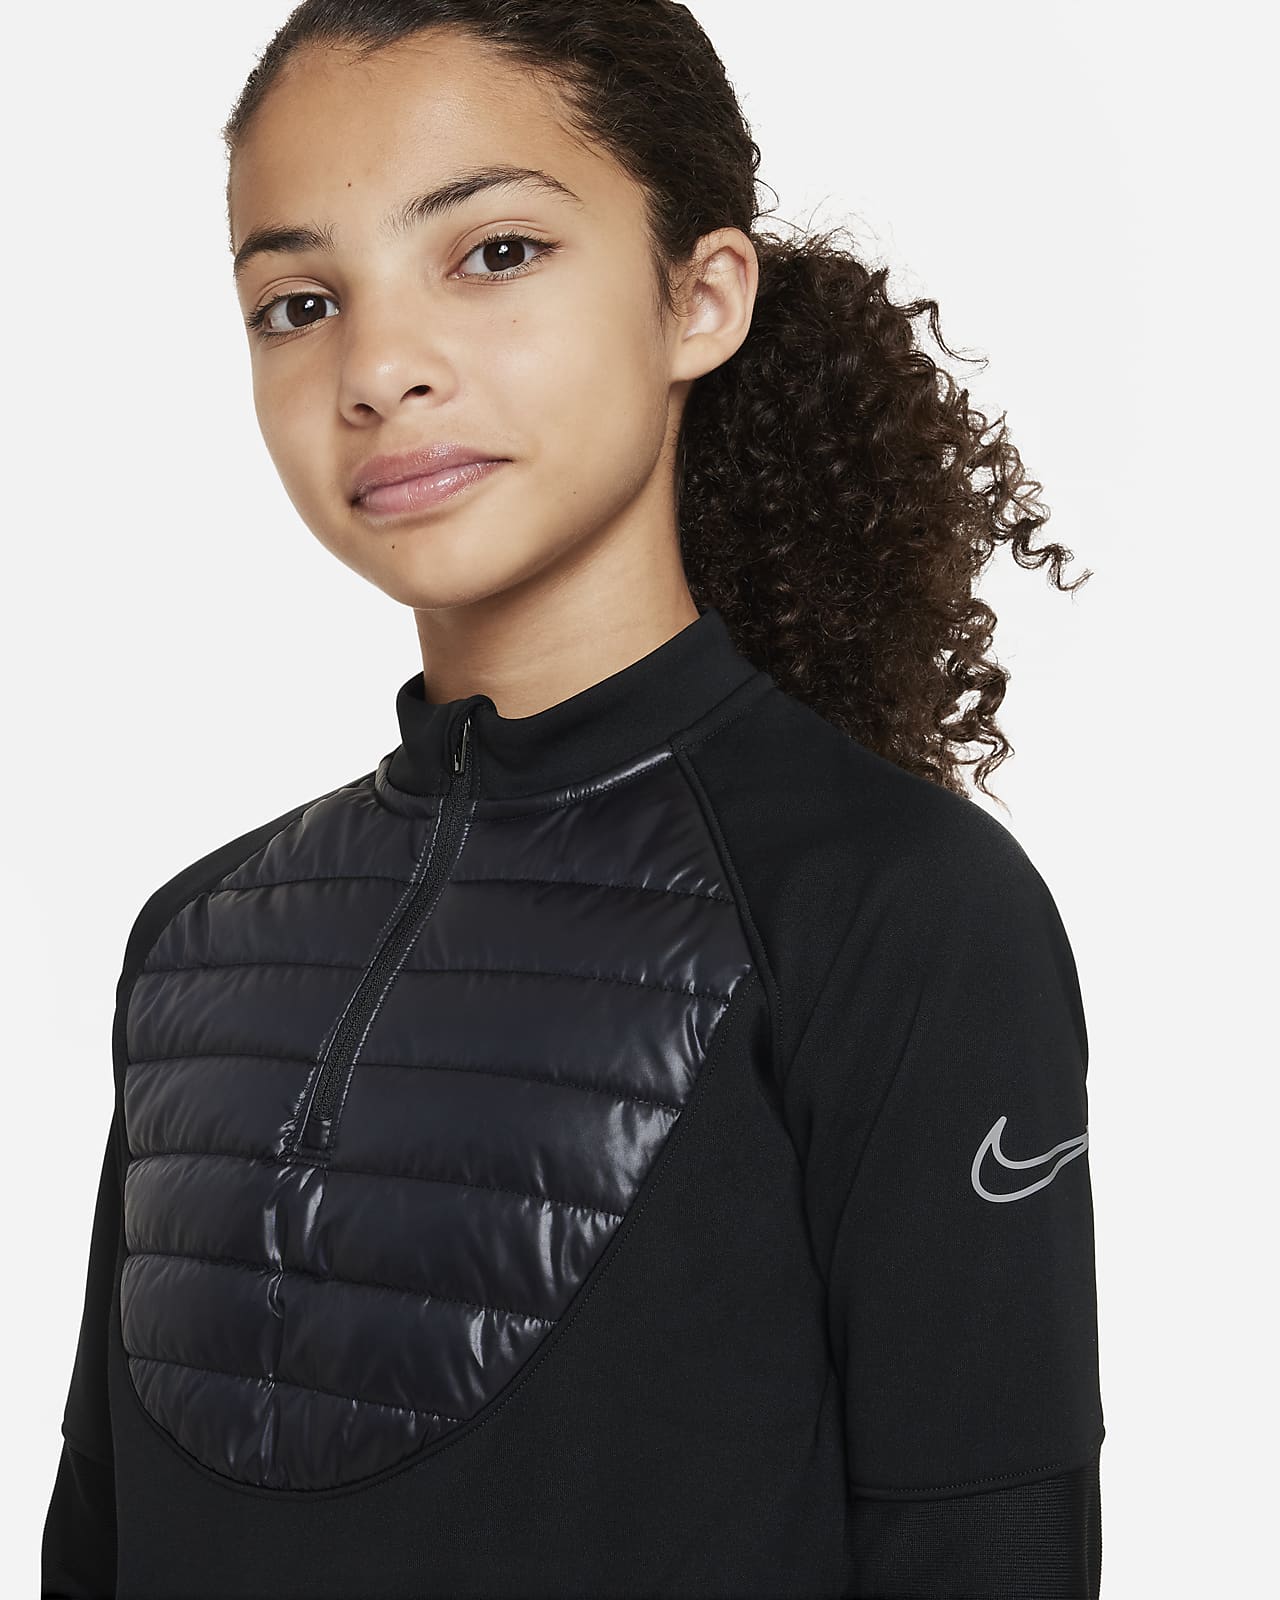 sneeuw Picasso Intuïtie Nike Therma-FIT Academy Winter Warrior Older Kids' Football Drill Top. Nike  IL